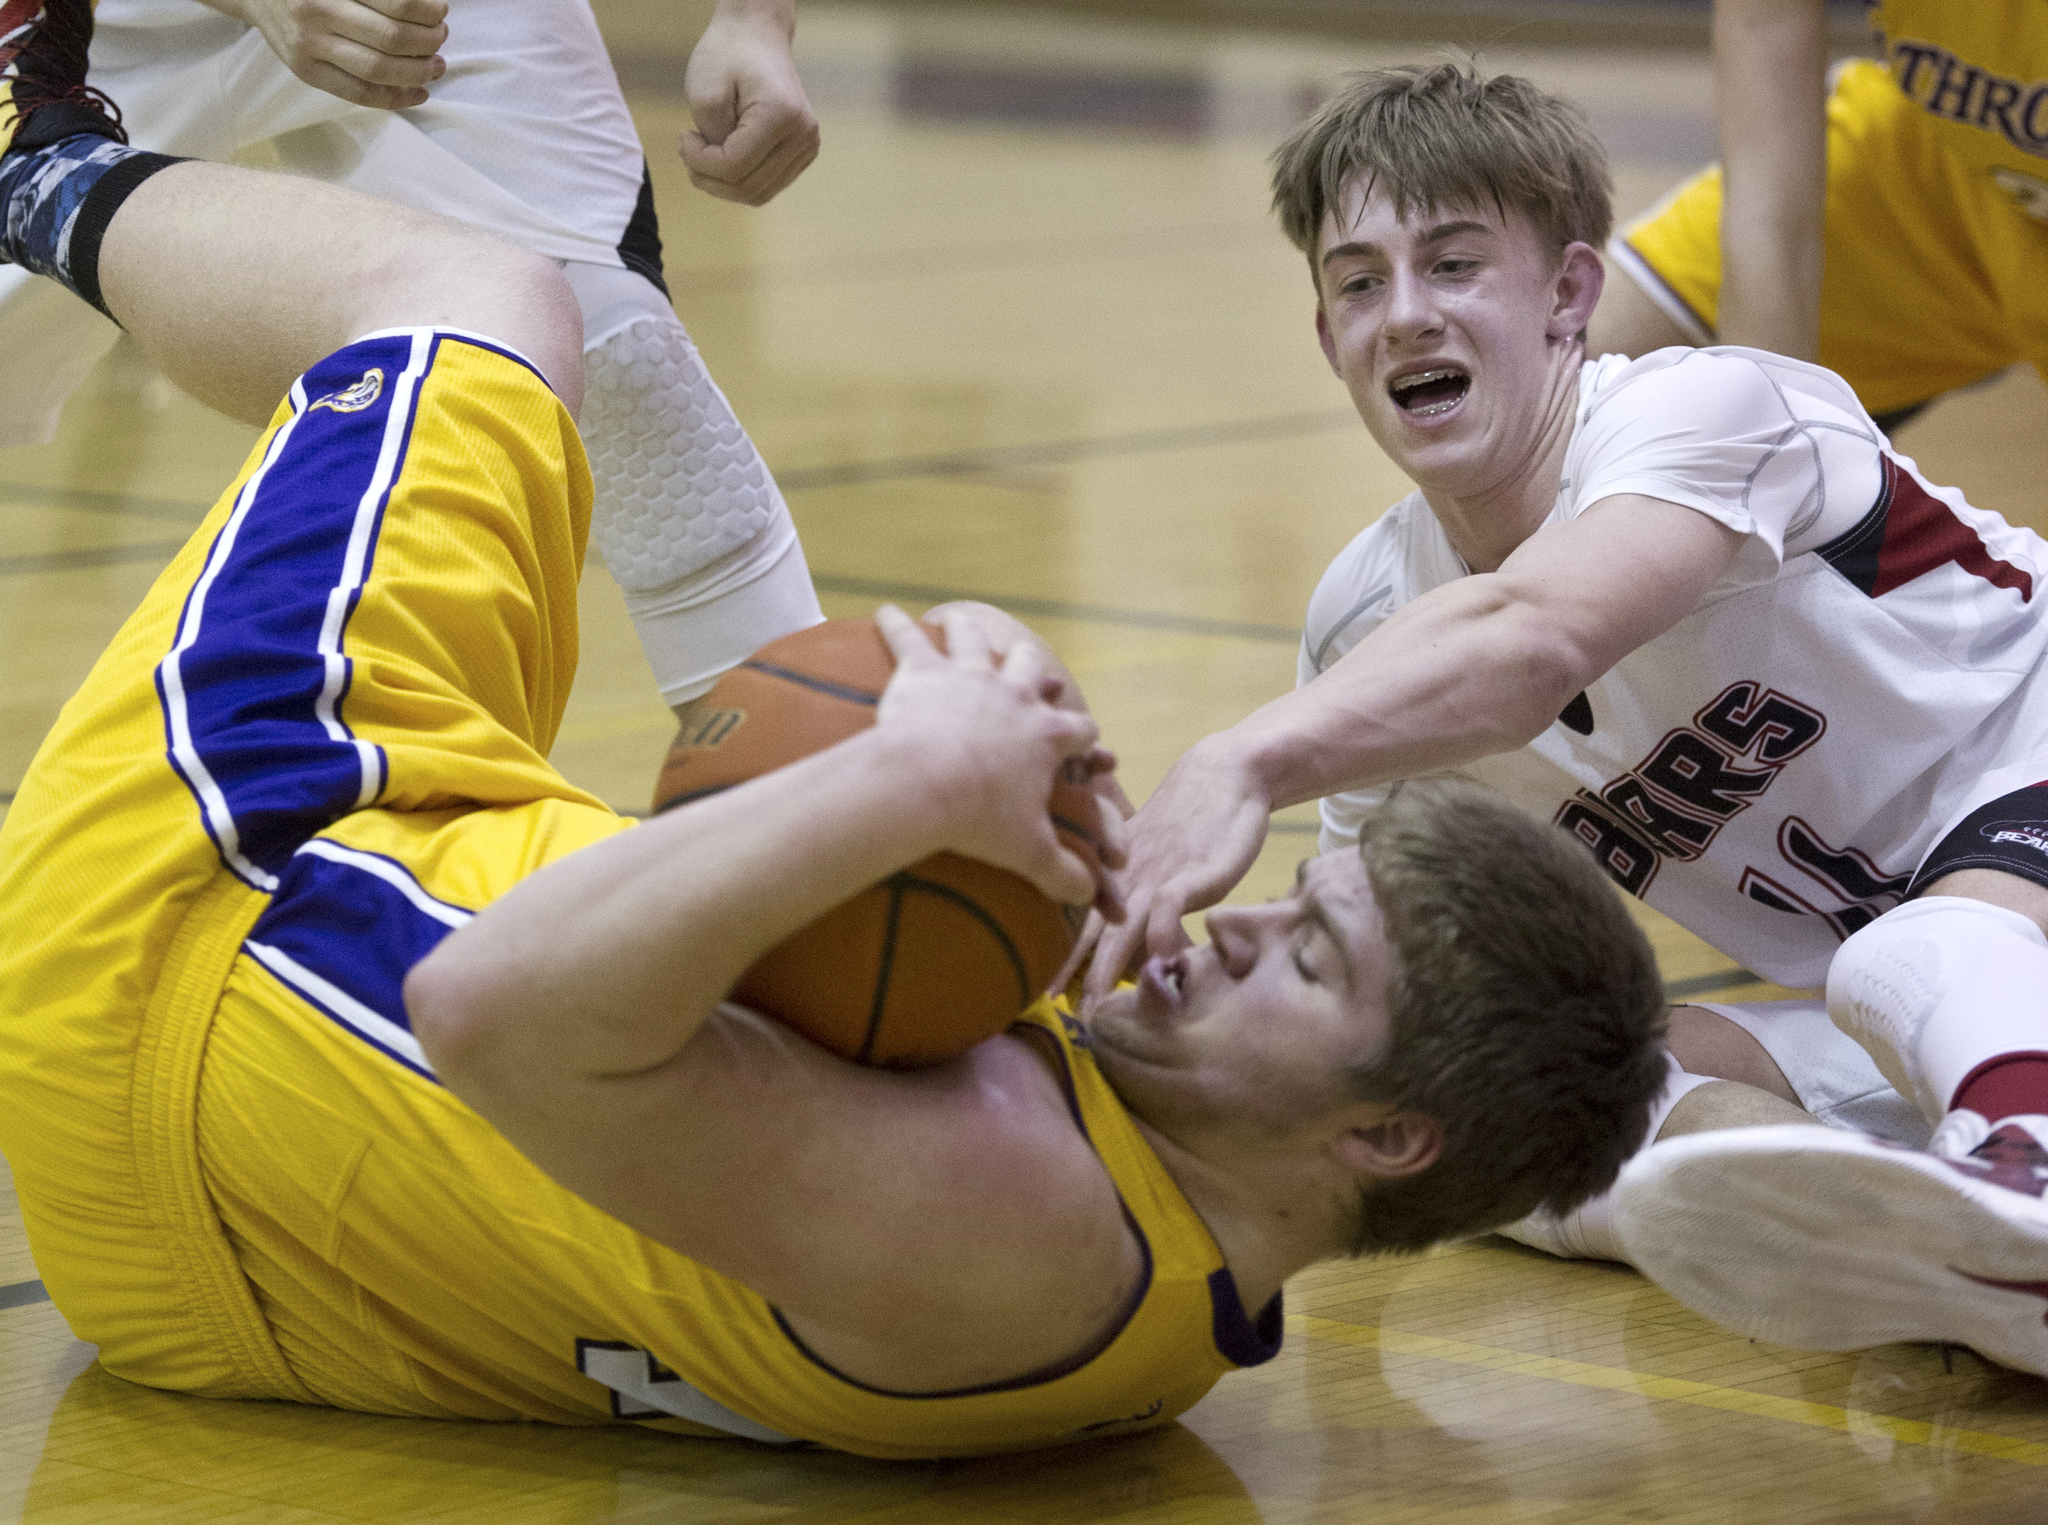 Juneau-Douglas’ Kolby Hoover, right, wrestles with Lathrop’s Jake Carlson for the ball at JDHS on Friday, Feb. 10, 2017. JDHS won 50-43. (Michael Penn | Juneau Empire)